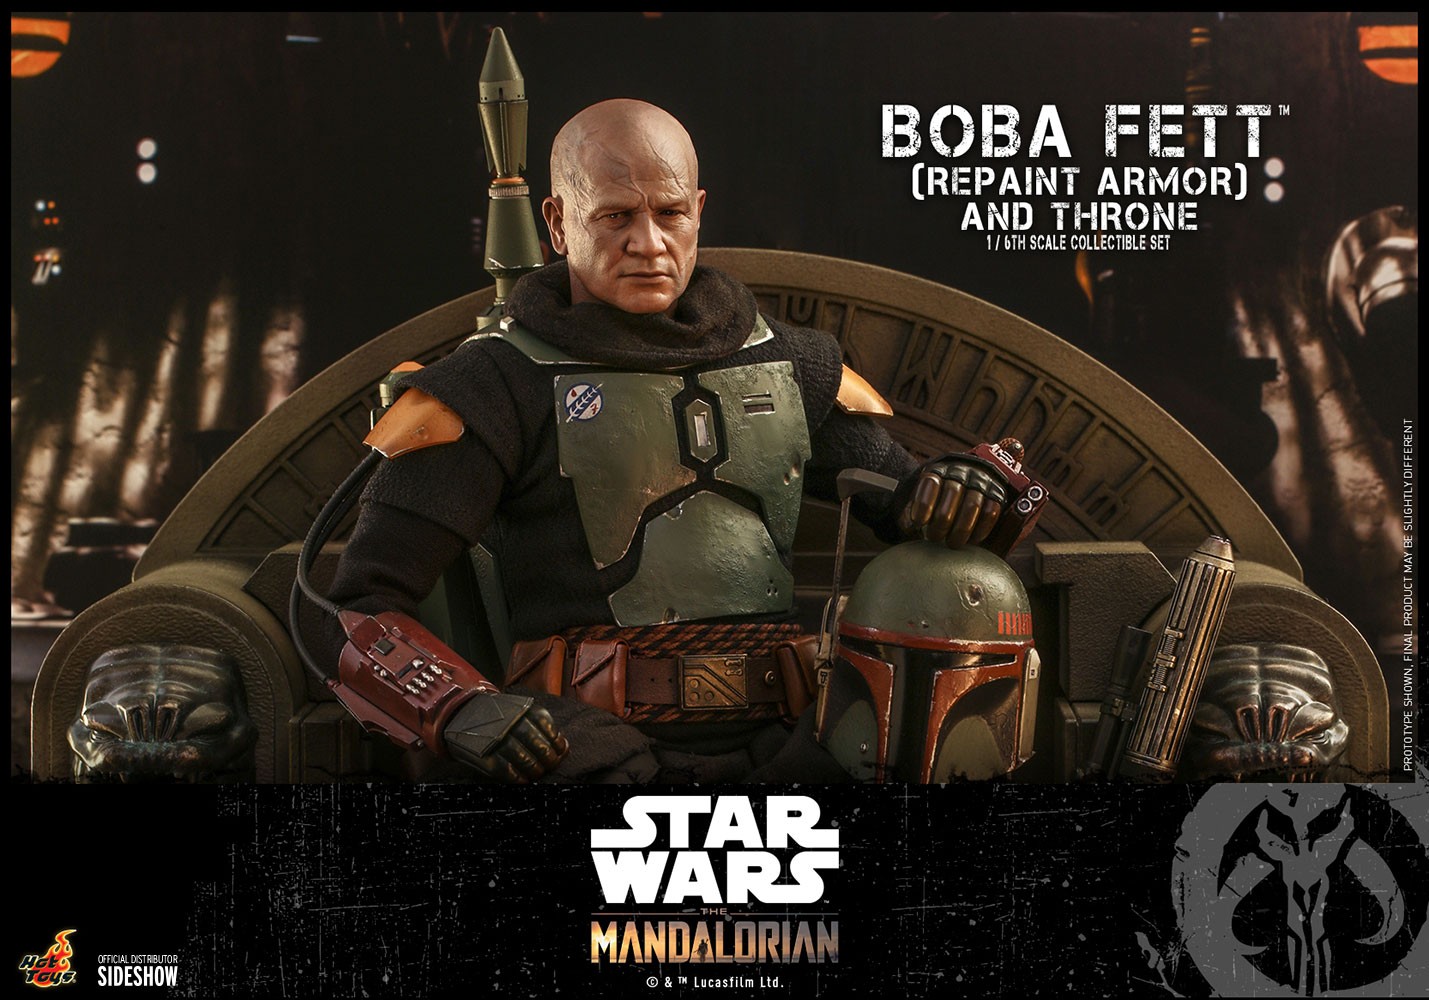 Boba Fett (Repaint Armor - Special Edition) and Throne Exclusive Edition (Prototype Shown) View 2